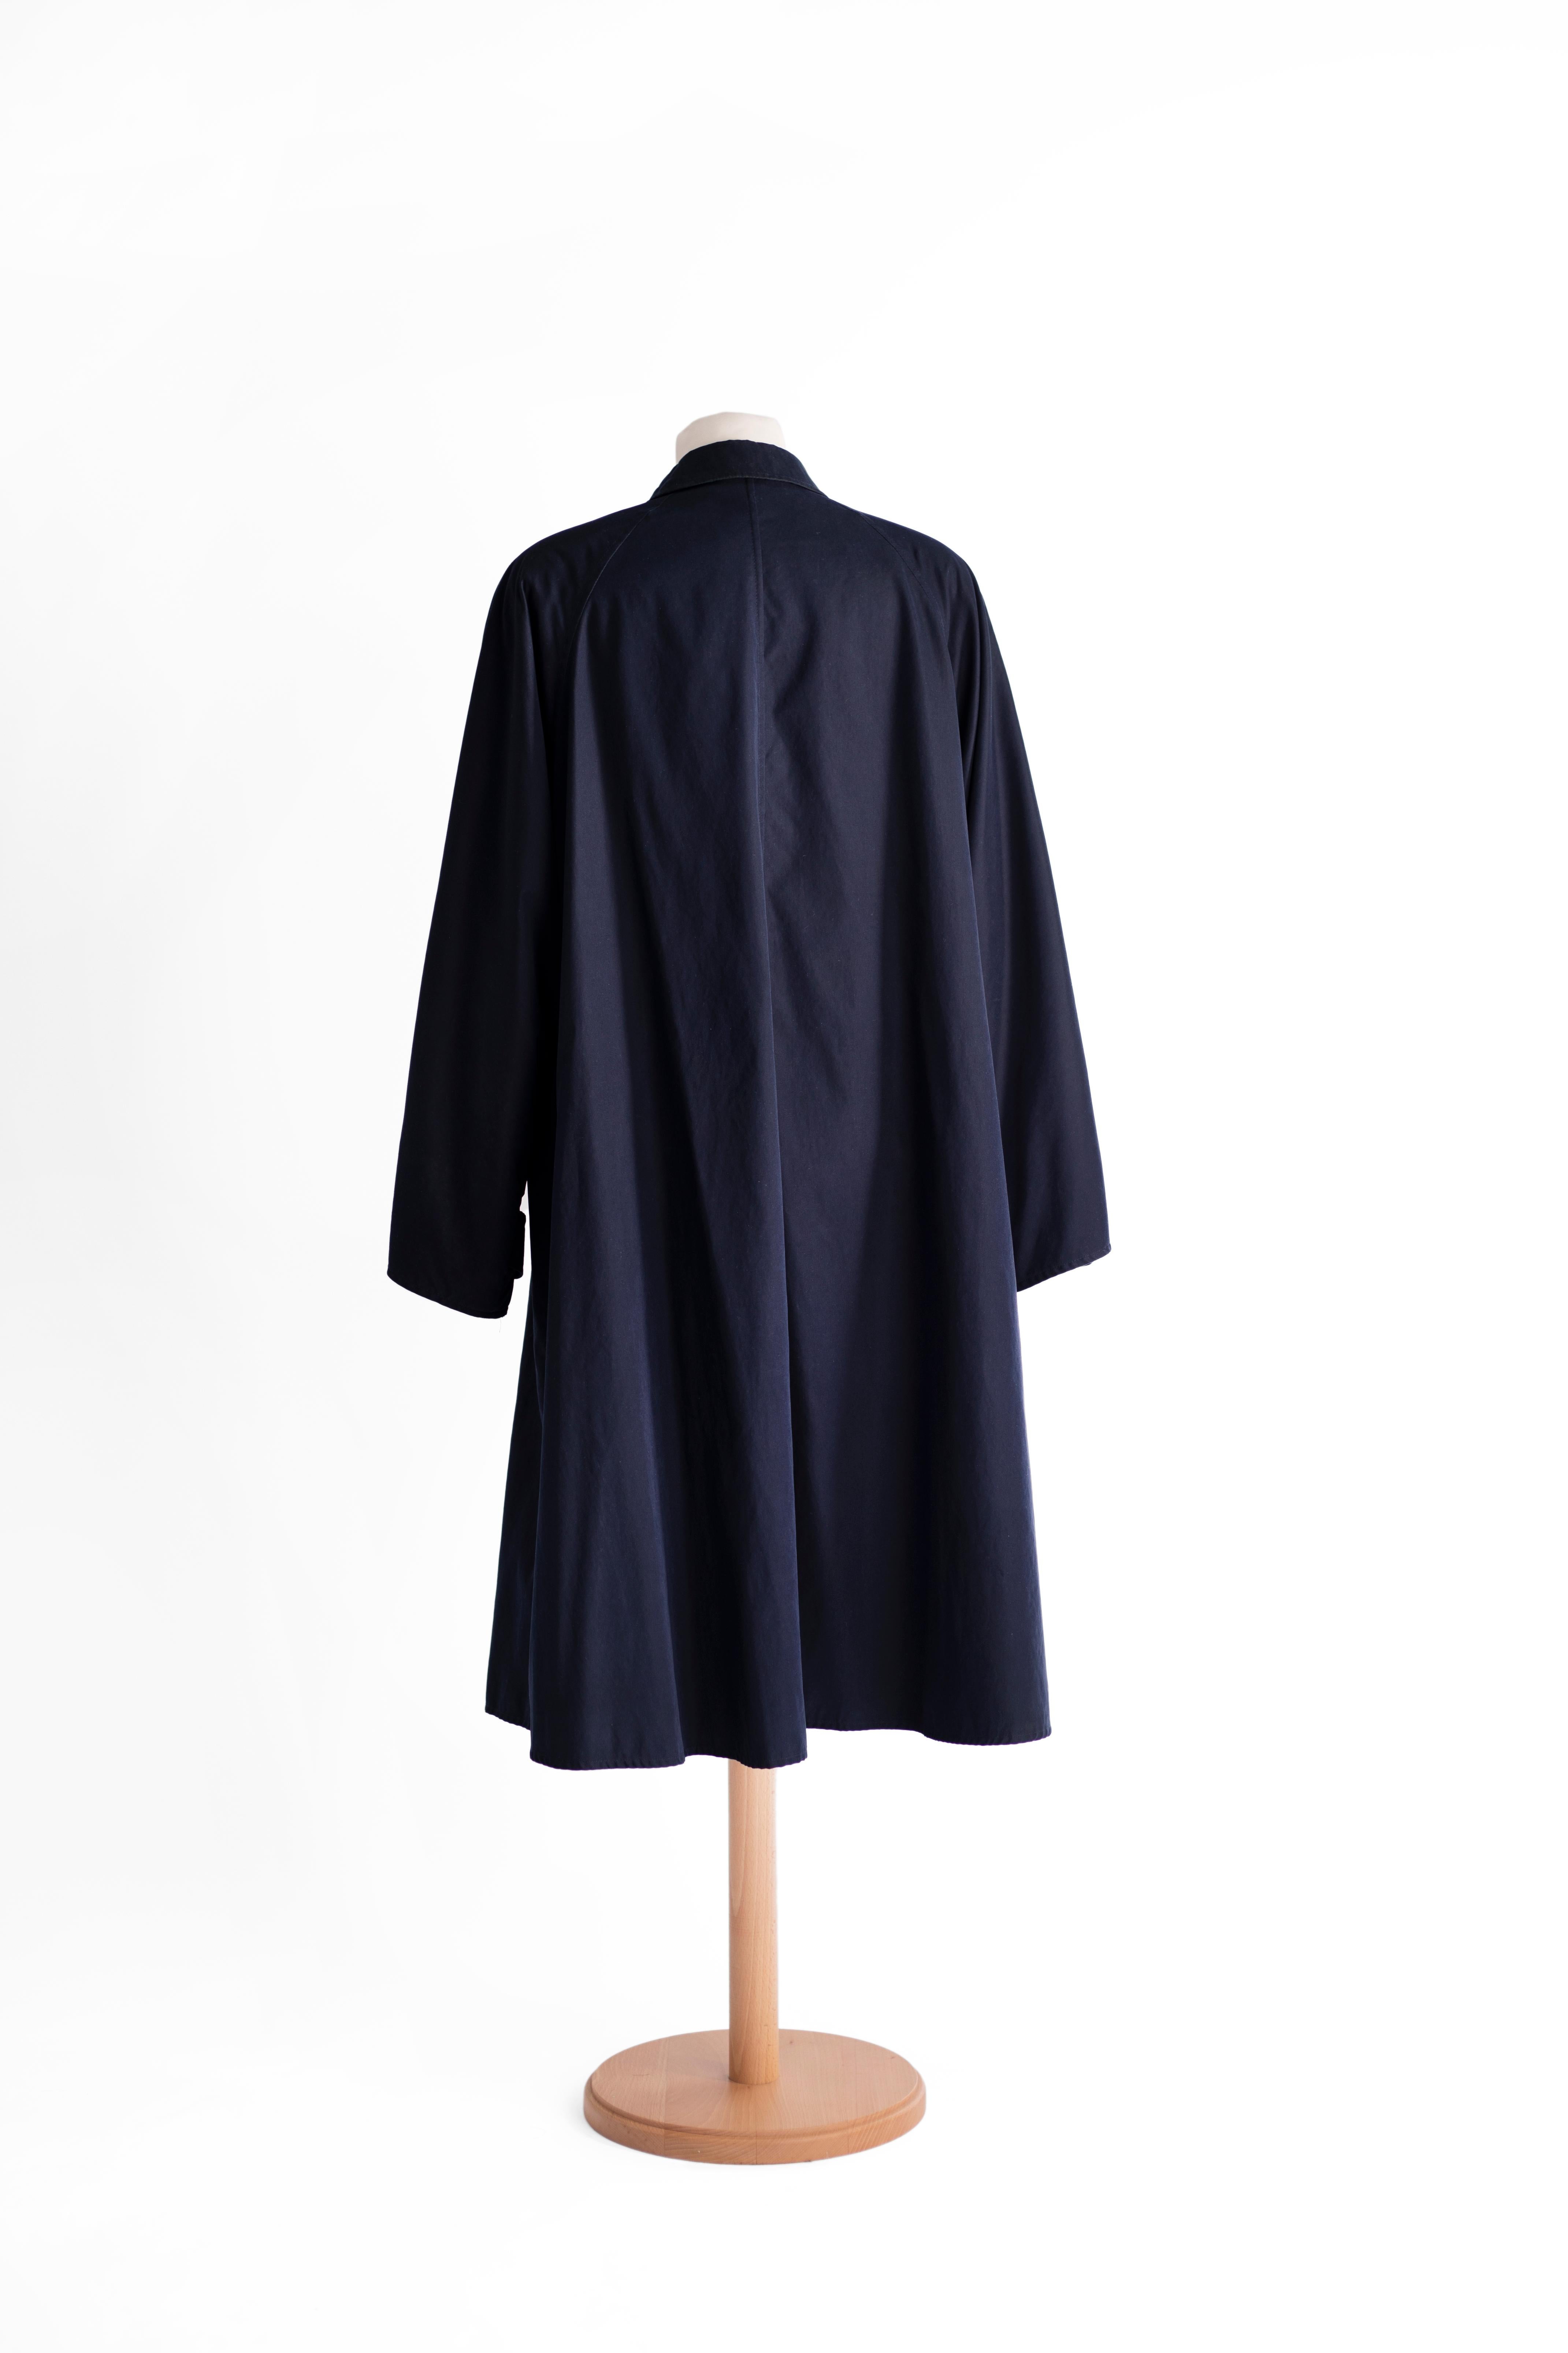 1980s Max Mara oversize trench coat. 
Deep blue color. Waterproof plyamide fabric.
OVERSIZE TG 42 

Size IT: 42
Size USA: 8